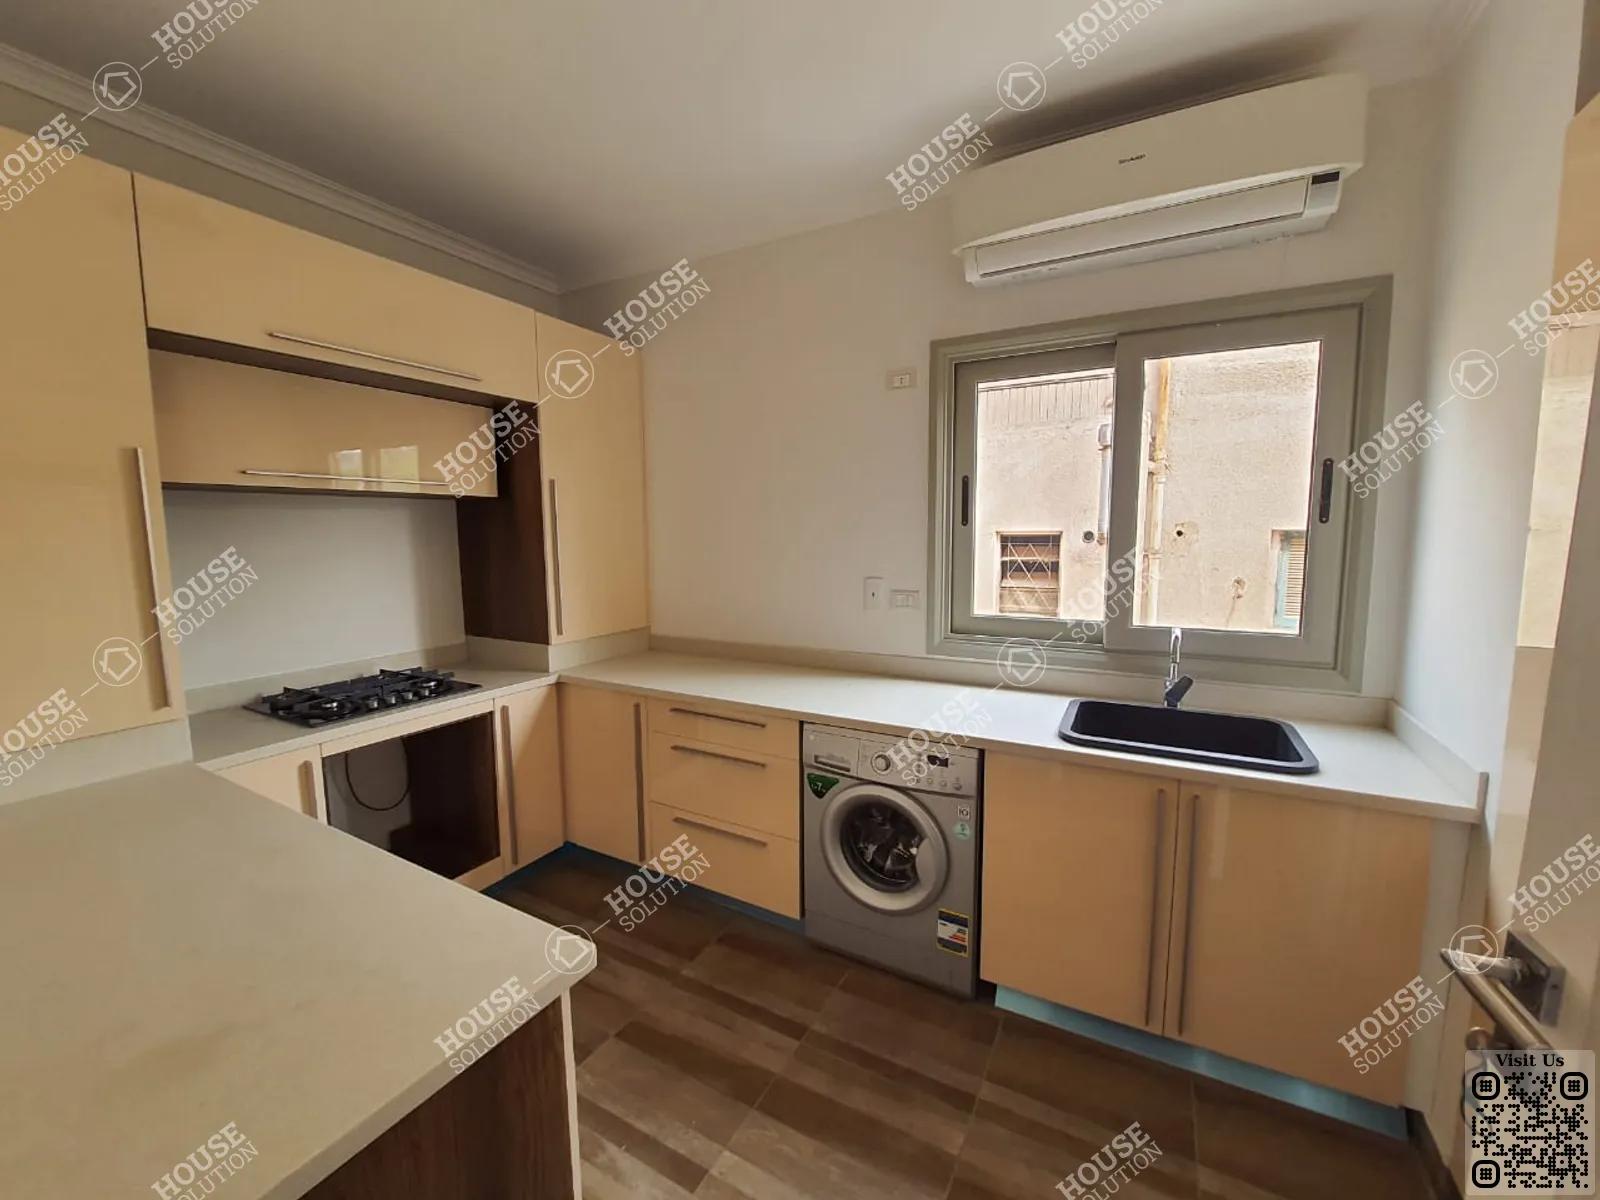 KITCHEN  @ Apartments For Rent In Maadi Maadi Degla Area: 150 m² consists of 2 Bedrooms 3 Bathrooms Modern furnished 5 stars #5237-2